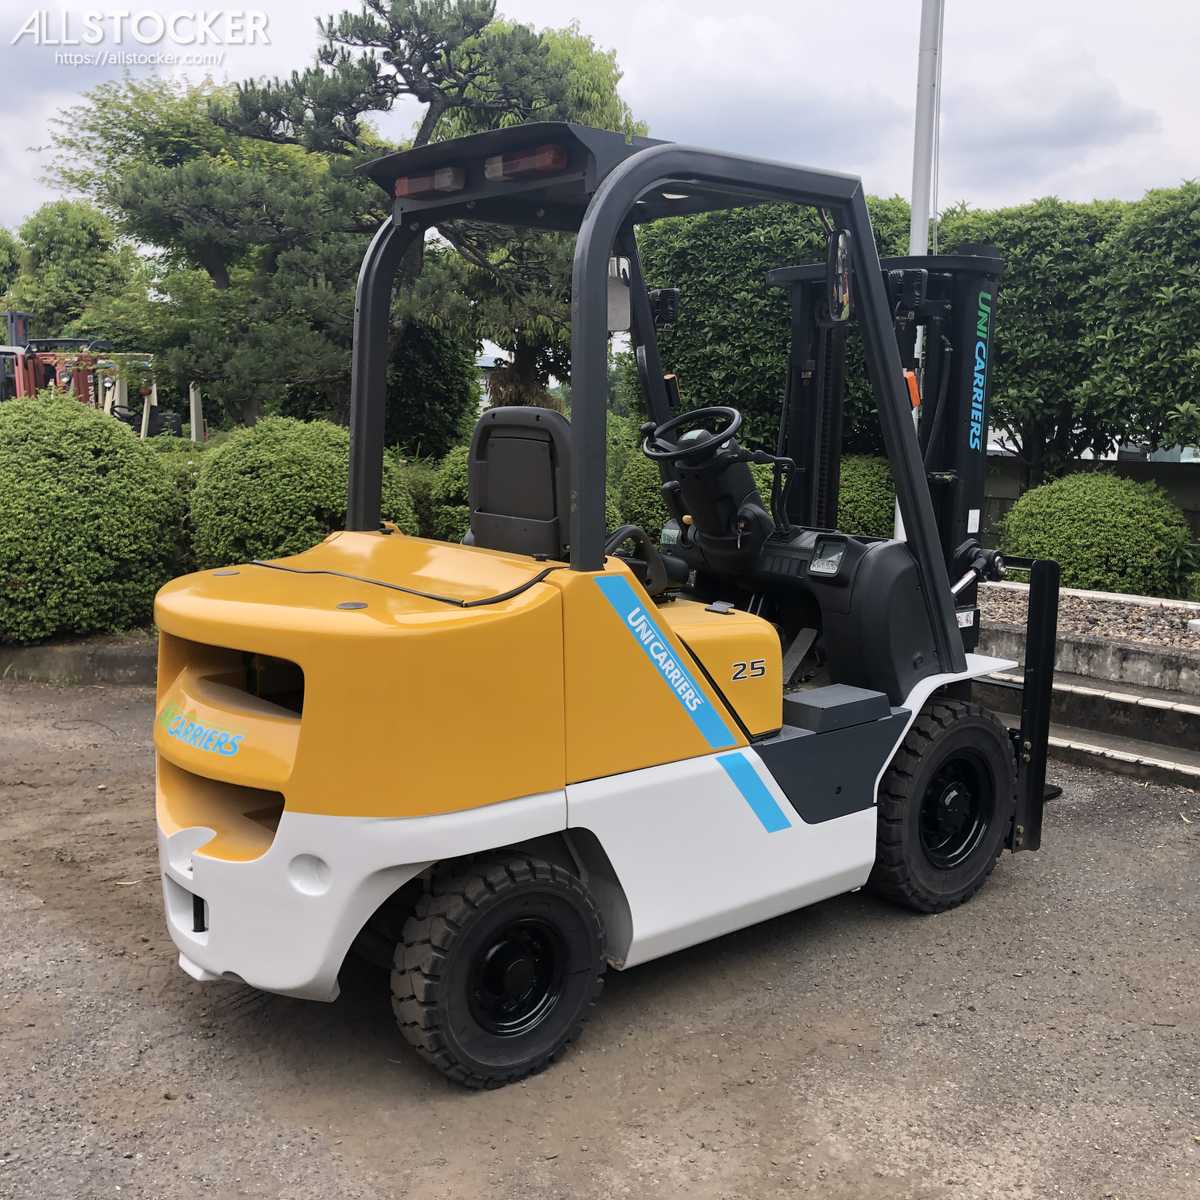 Tcm Fhd25t5 Forklifts 2016y 68h Saitama Ken Used Construction Equipment Vehicles And Farm Machinery For Sale Allstocker